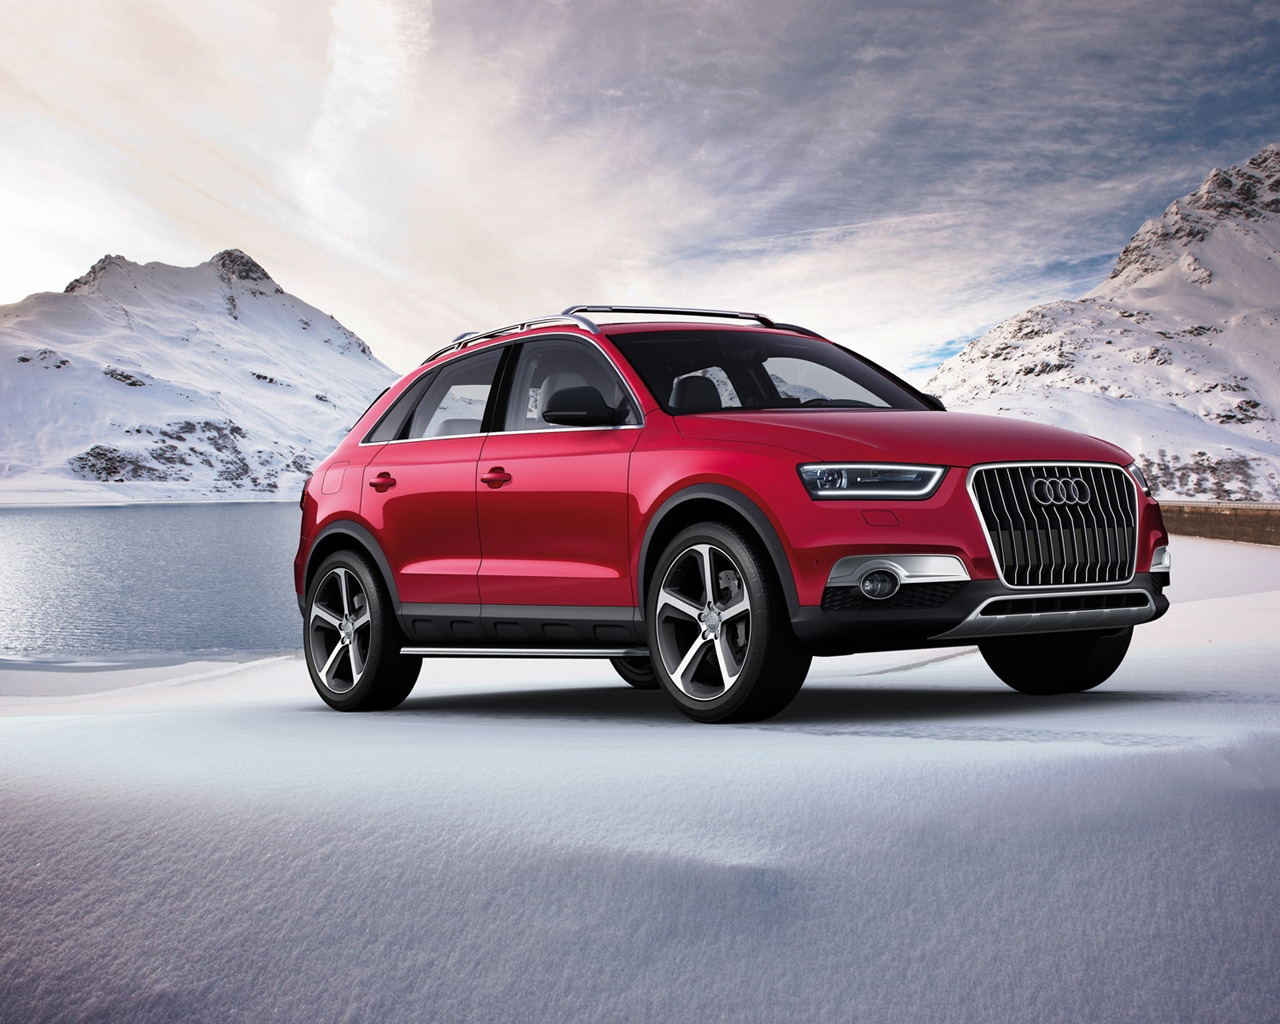 2012 Audi Q3 Vail for 1280 x 1024 resolution